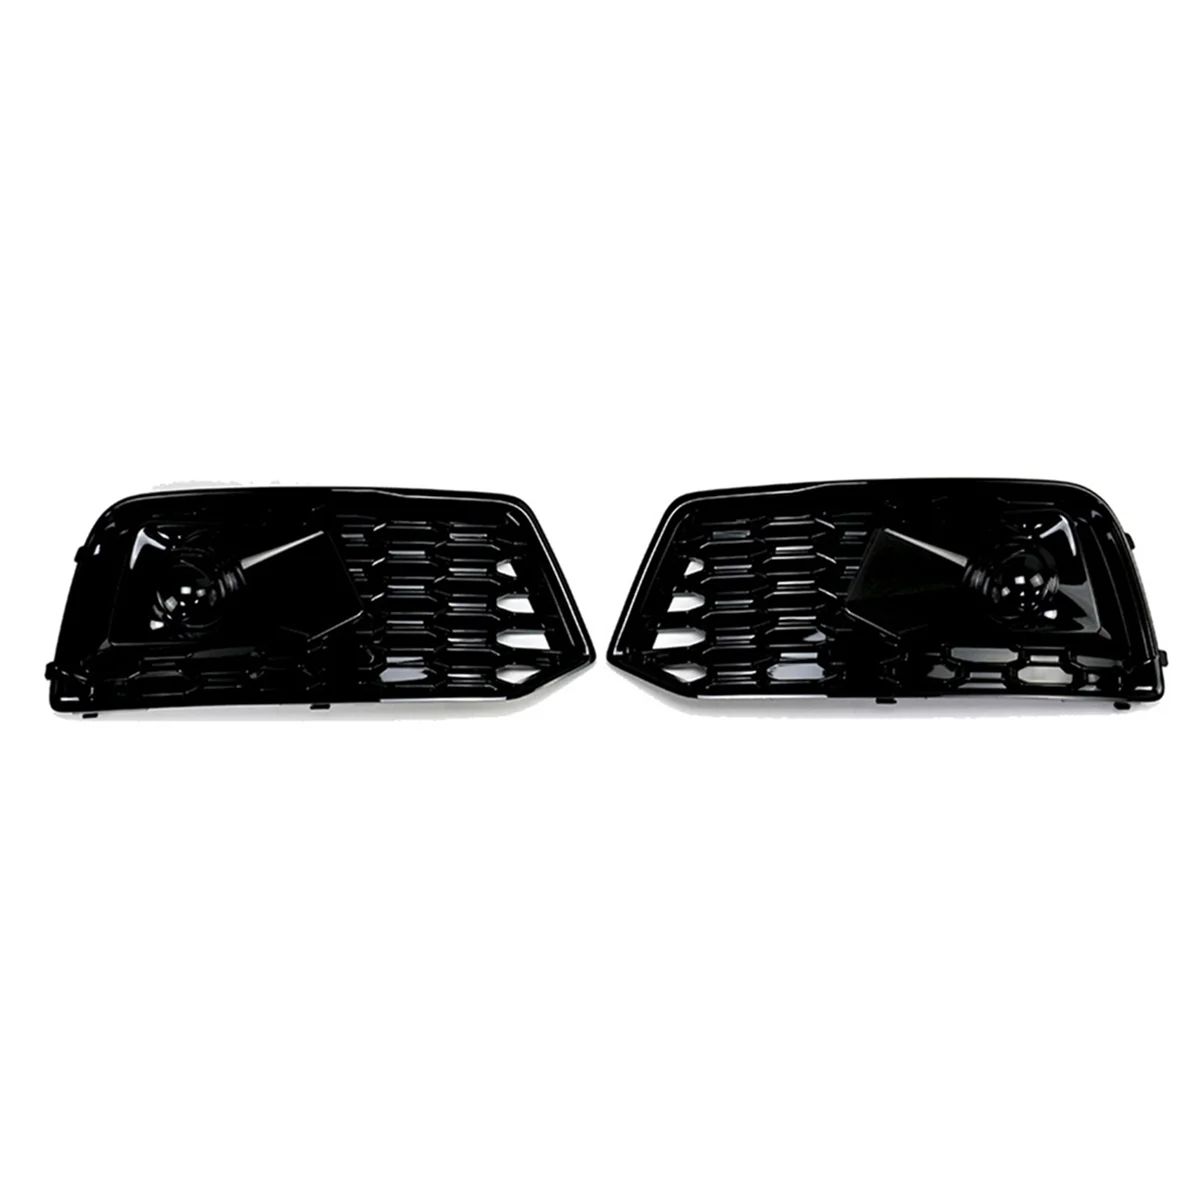 

For Audi Q5L 2018-2020 Car Front Fog Light Lamp Cover RSQ5 Style Grille